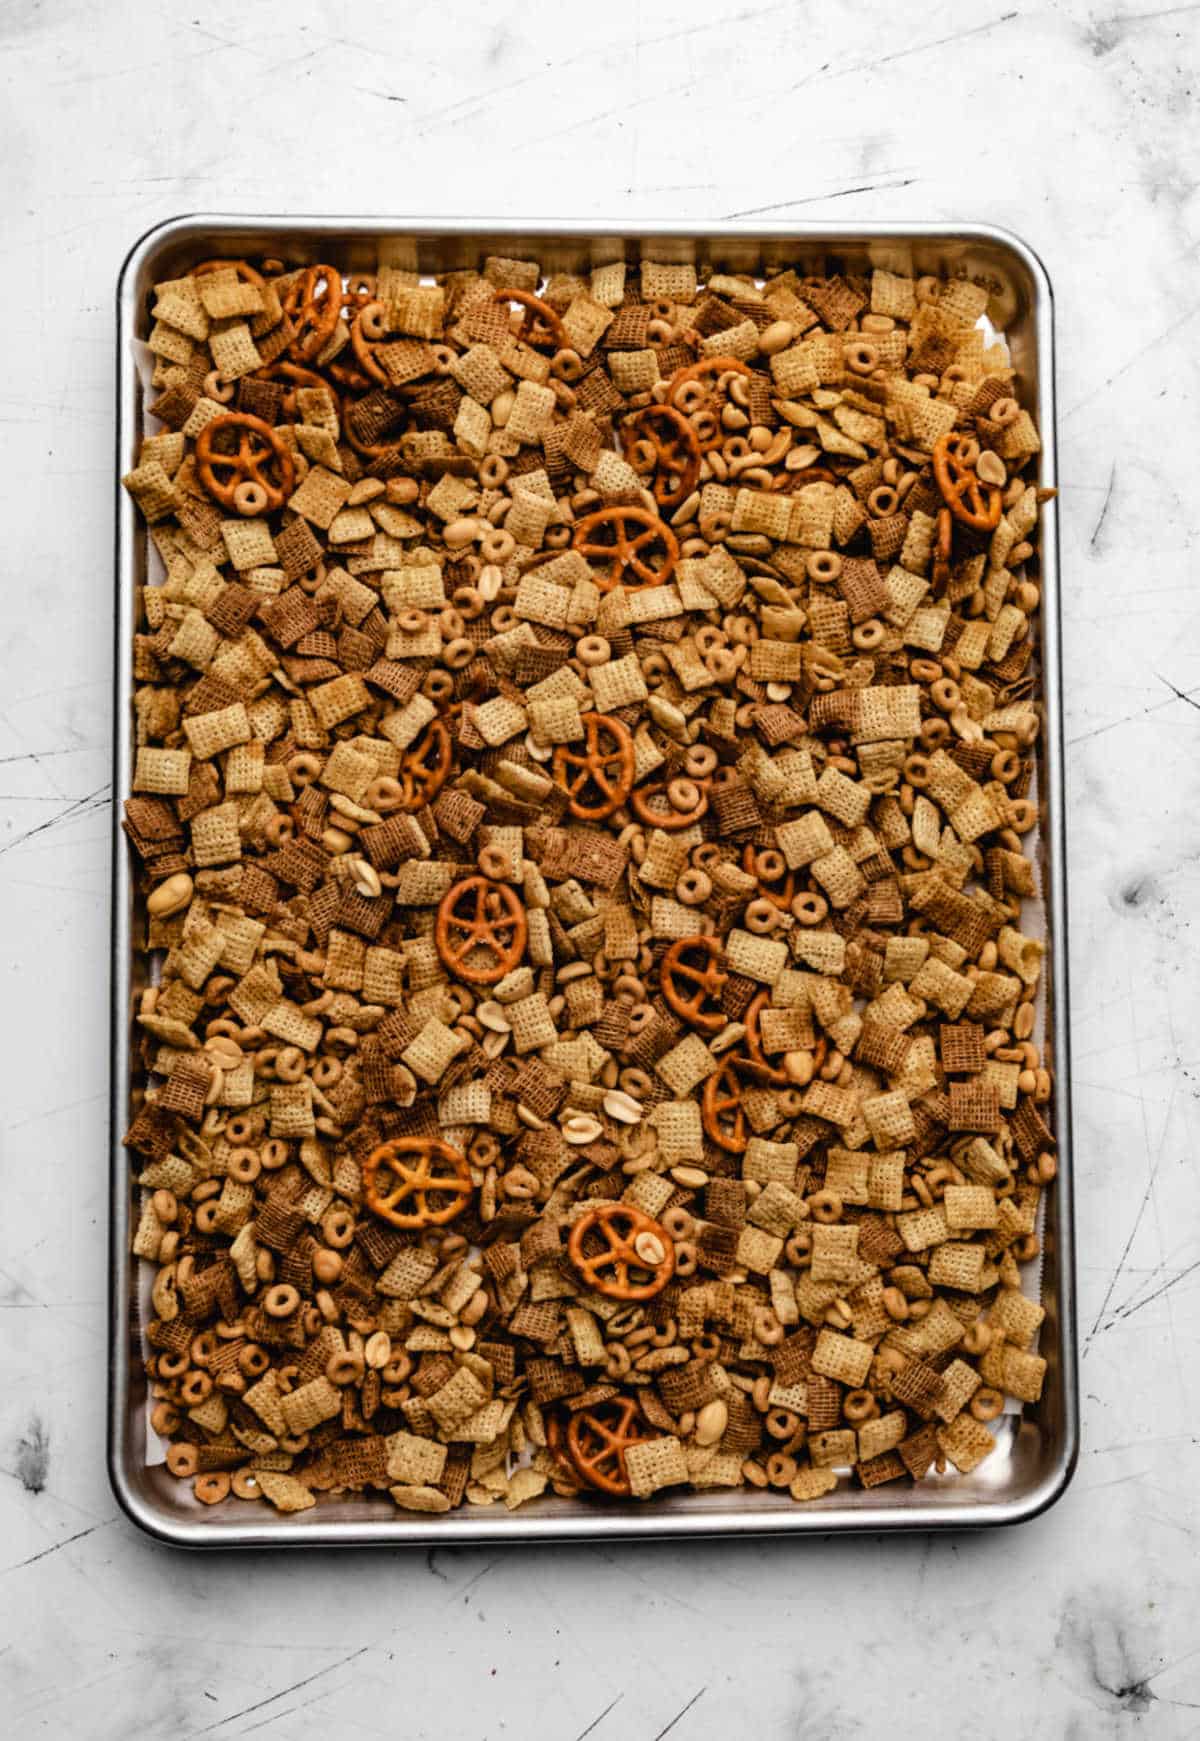 Slow cooker Chex mix spread out on a baking tray.